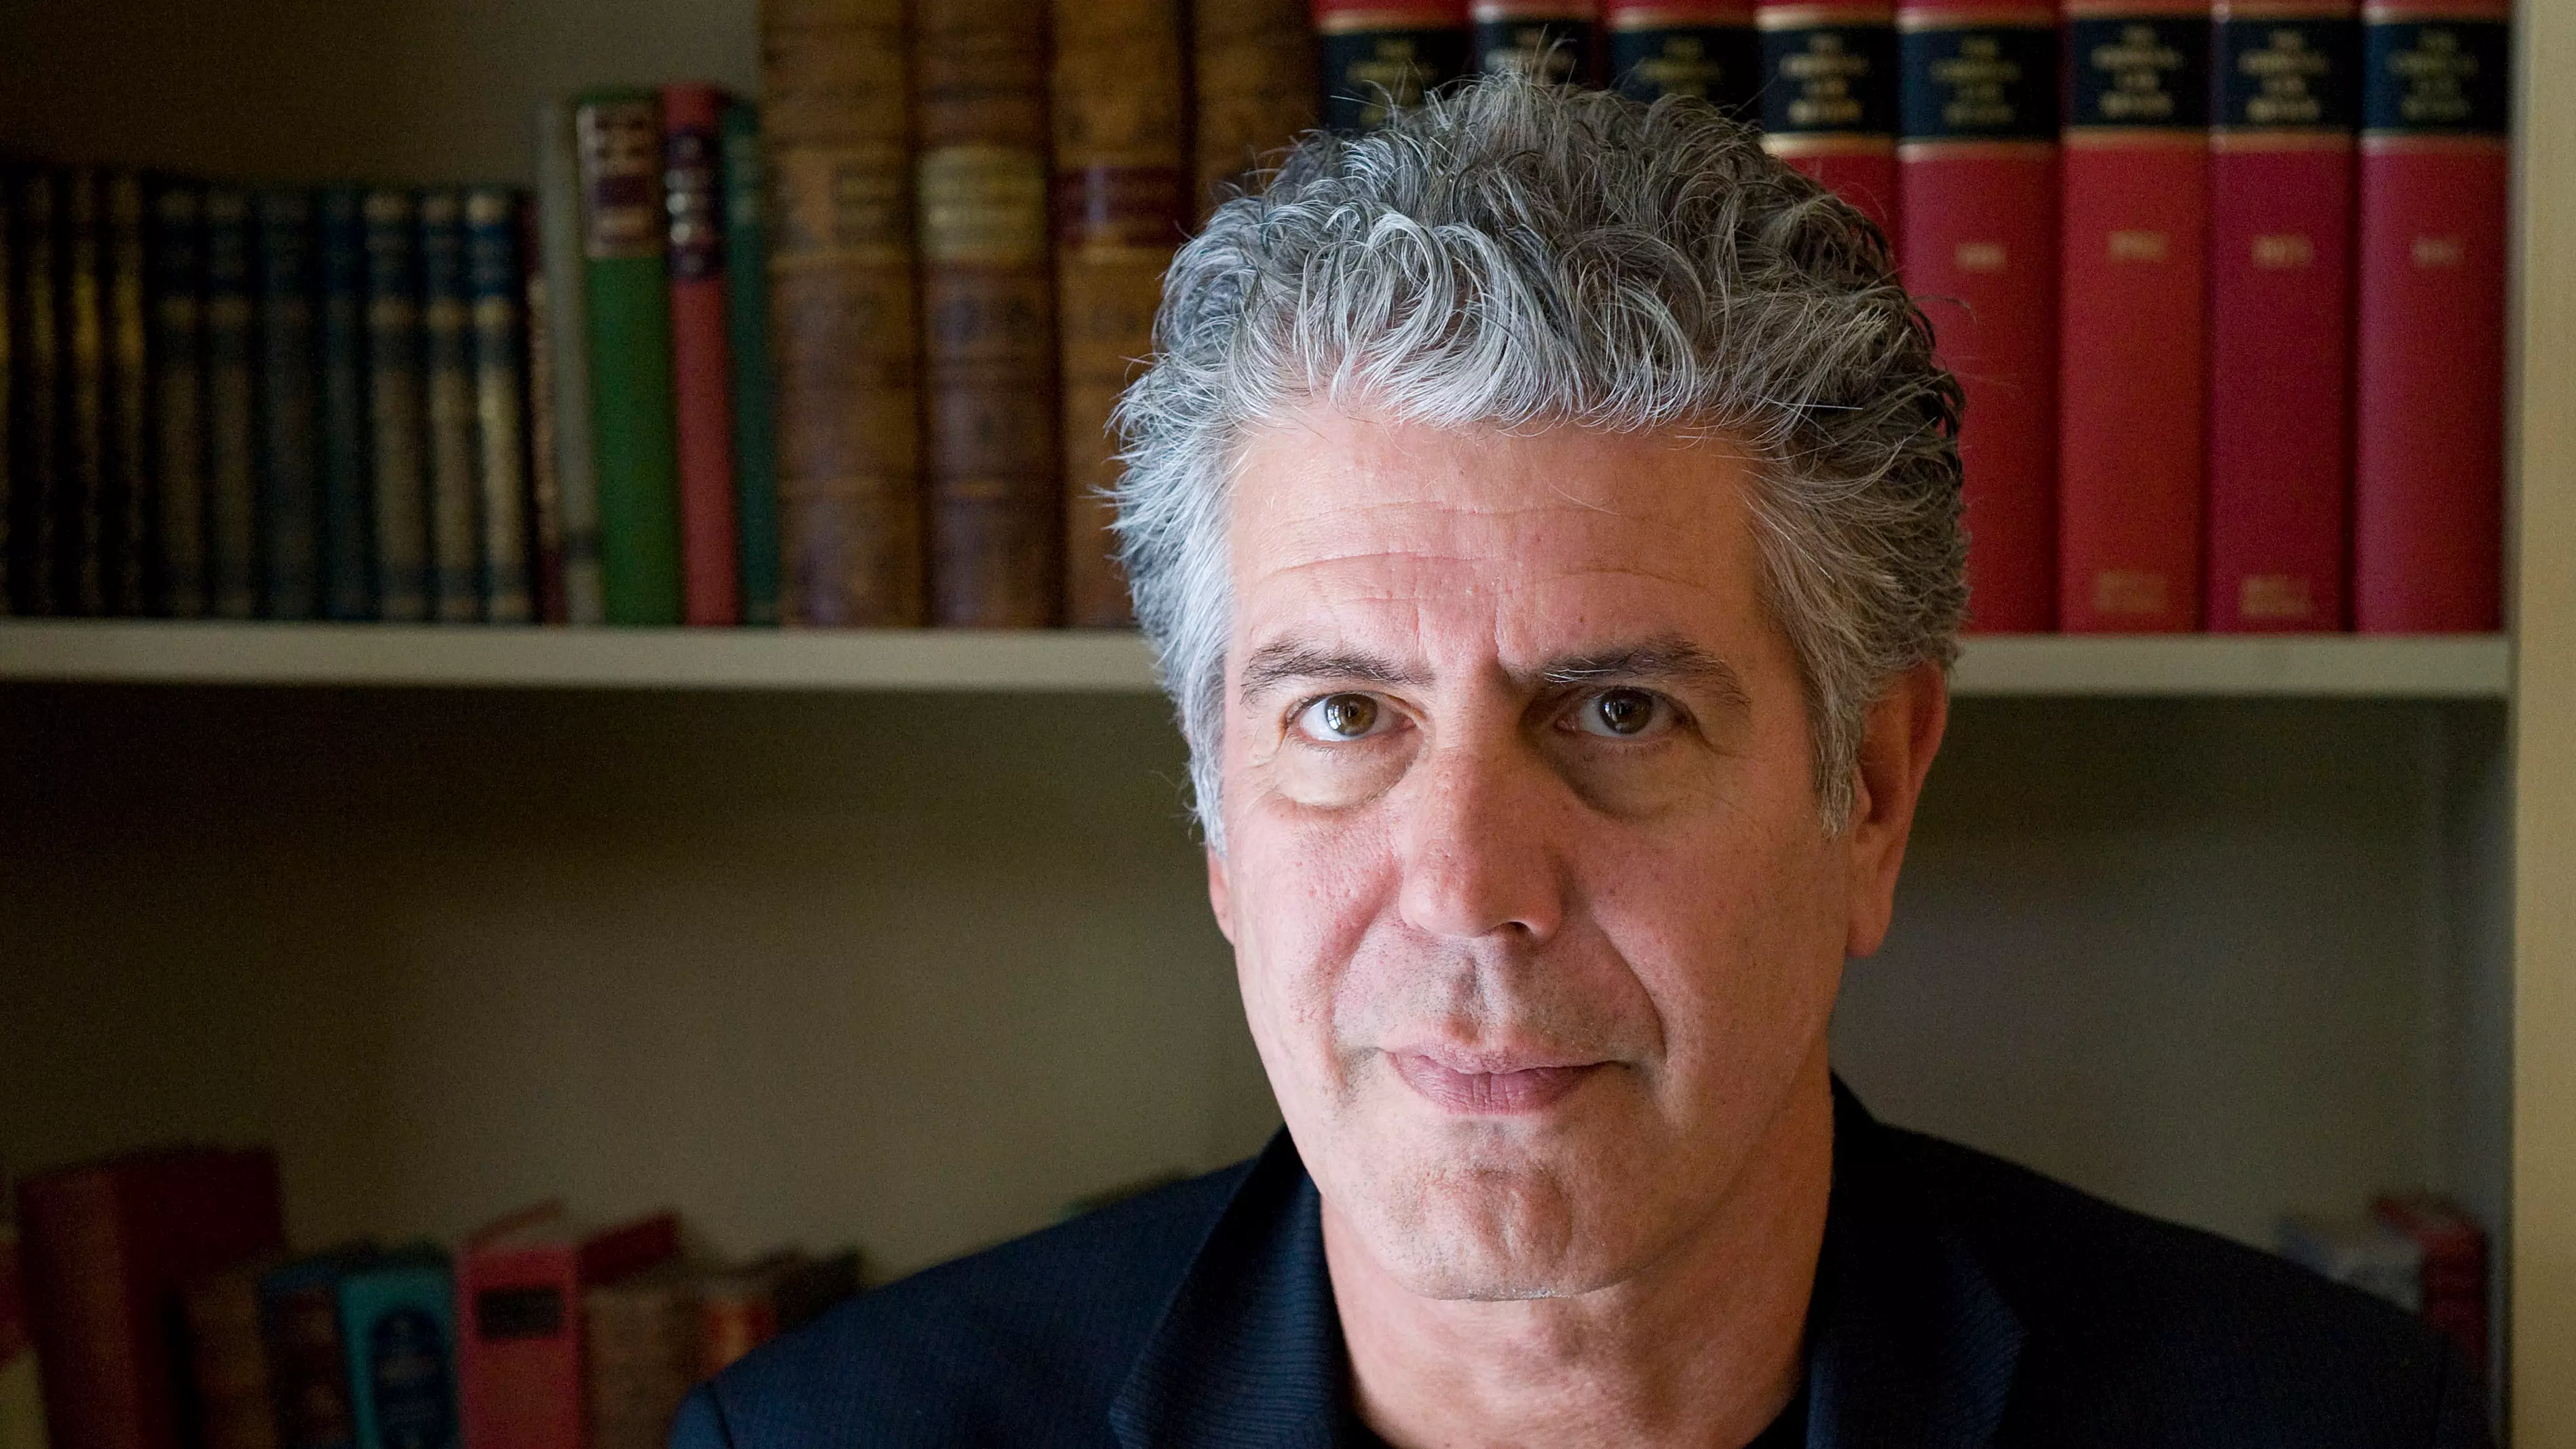 Anthony Bourdain Bought A Painting With A Chilling Title Just Before His Death